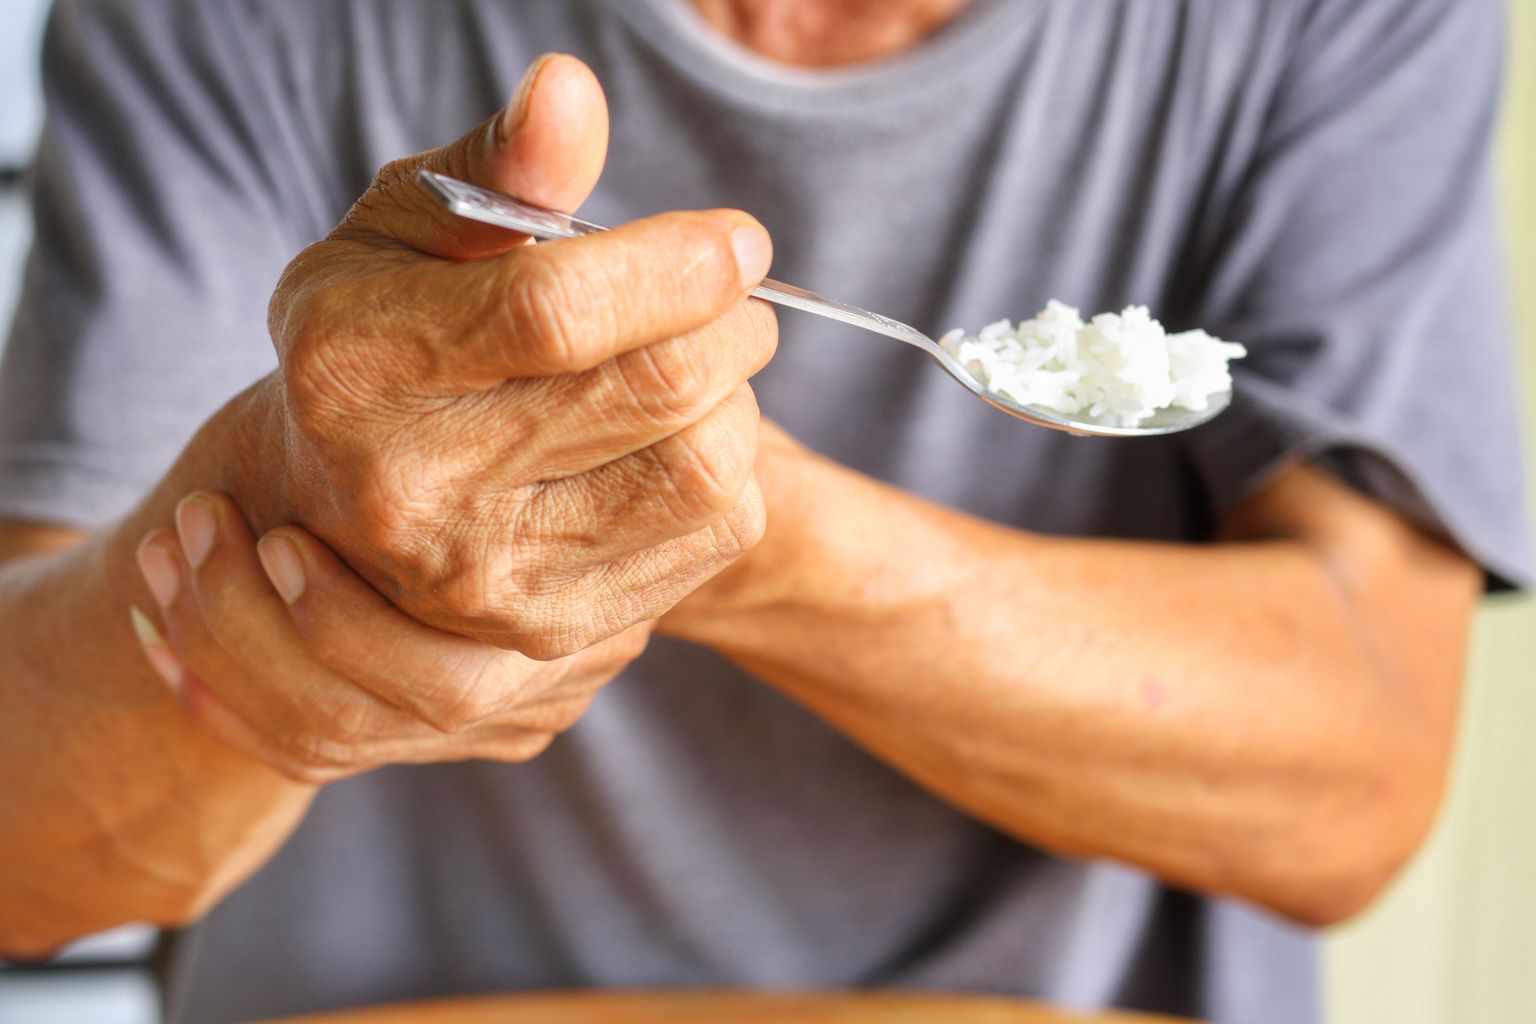 An elderly person holds hands while eating.